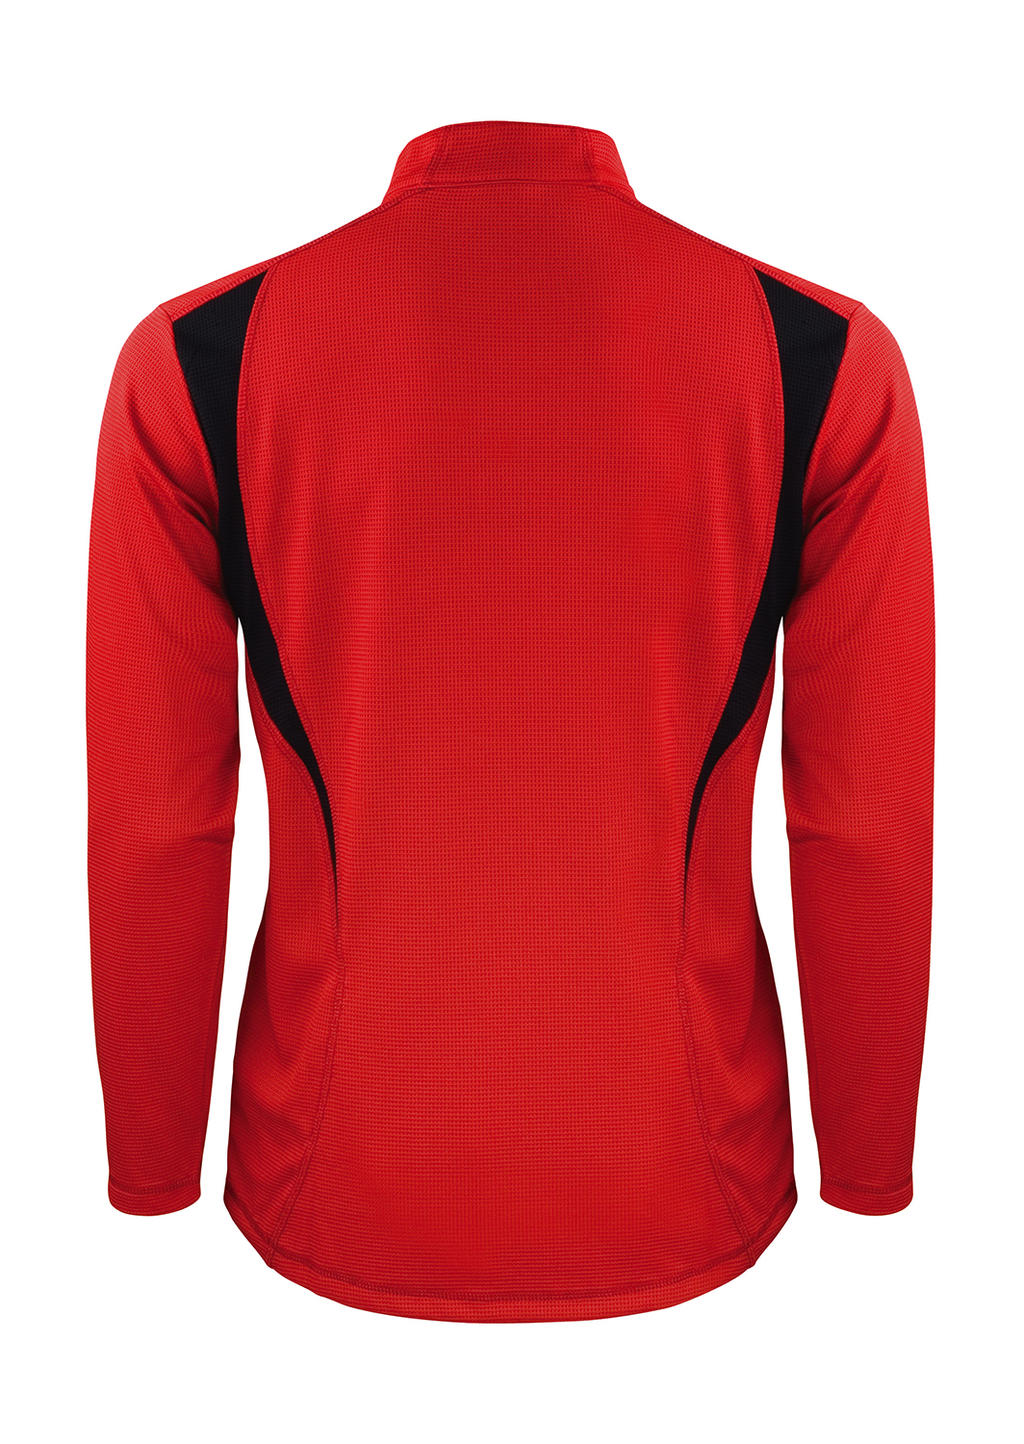  Spiro Trial Training Top in Farbe White/Red/White